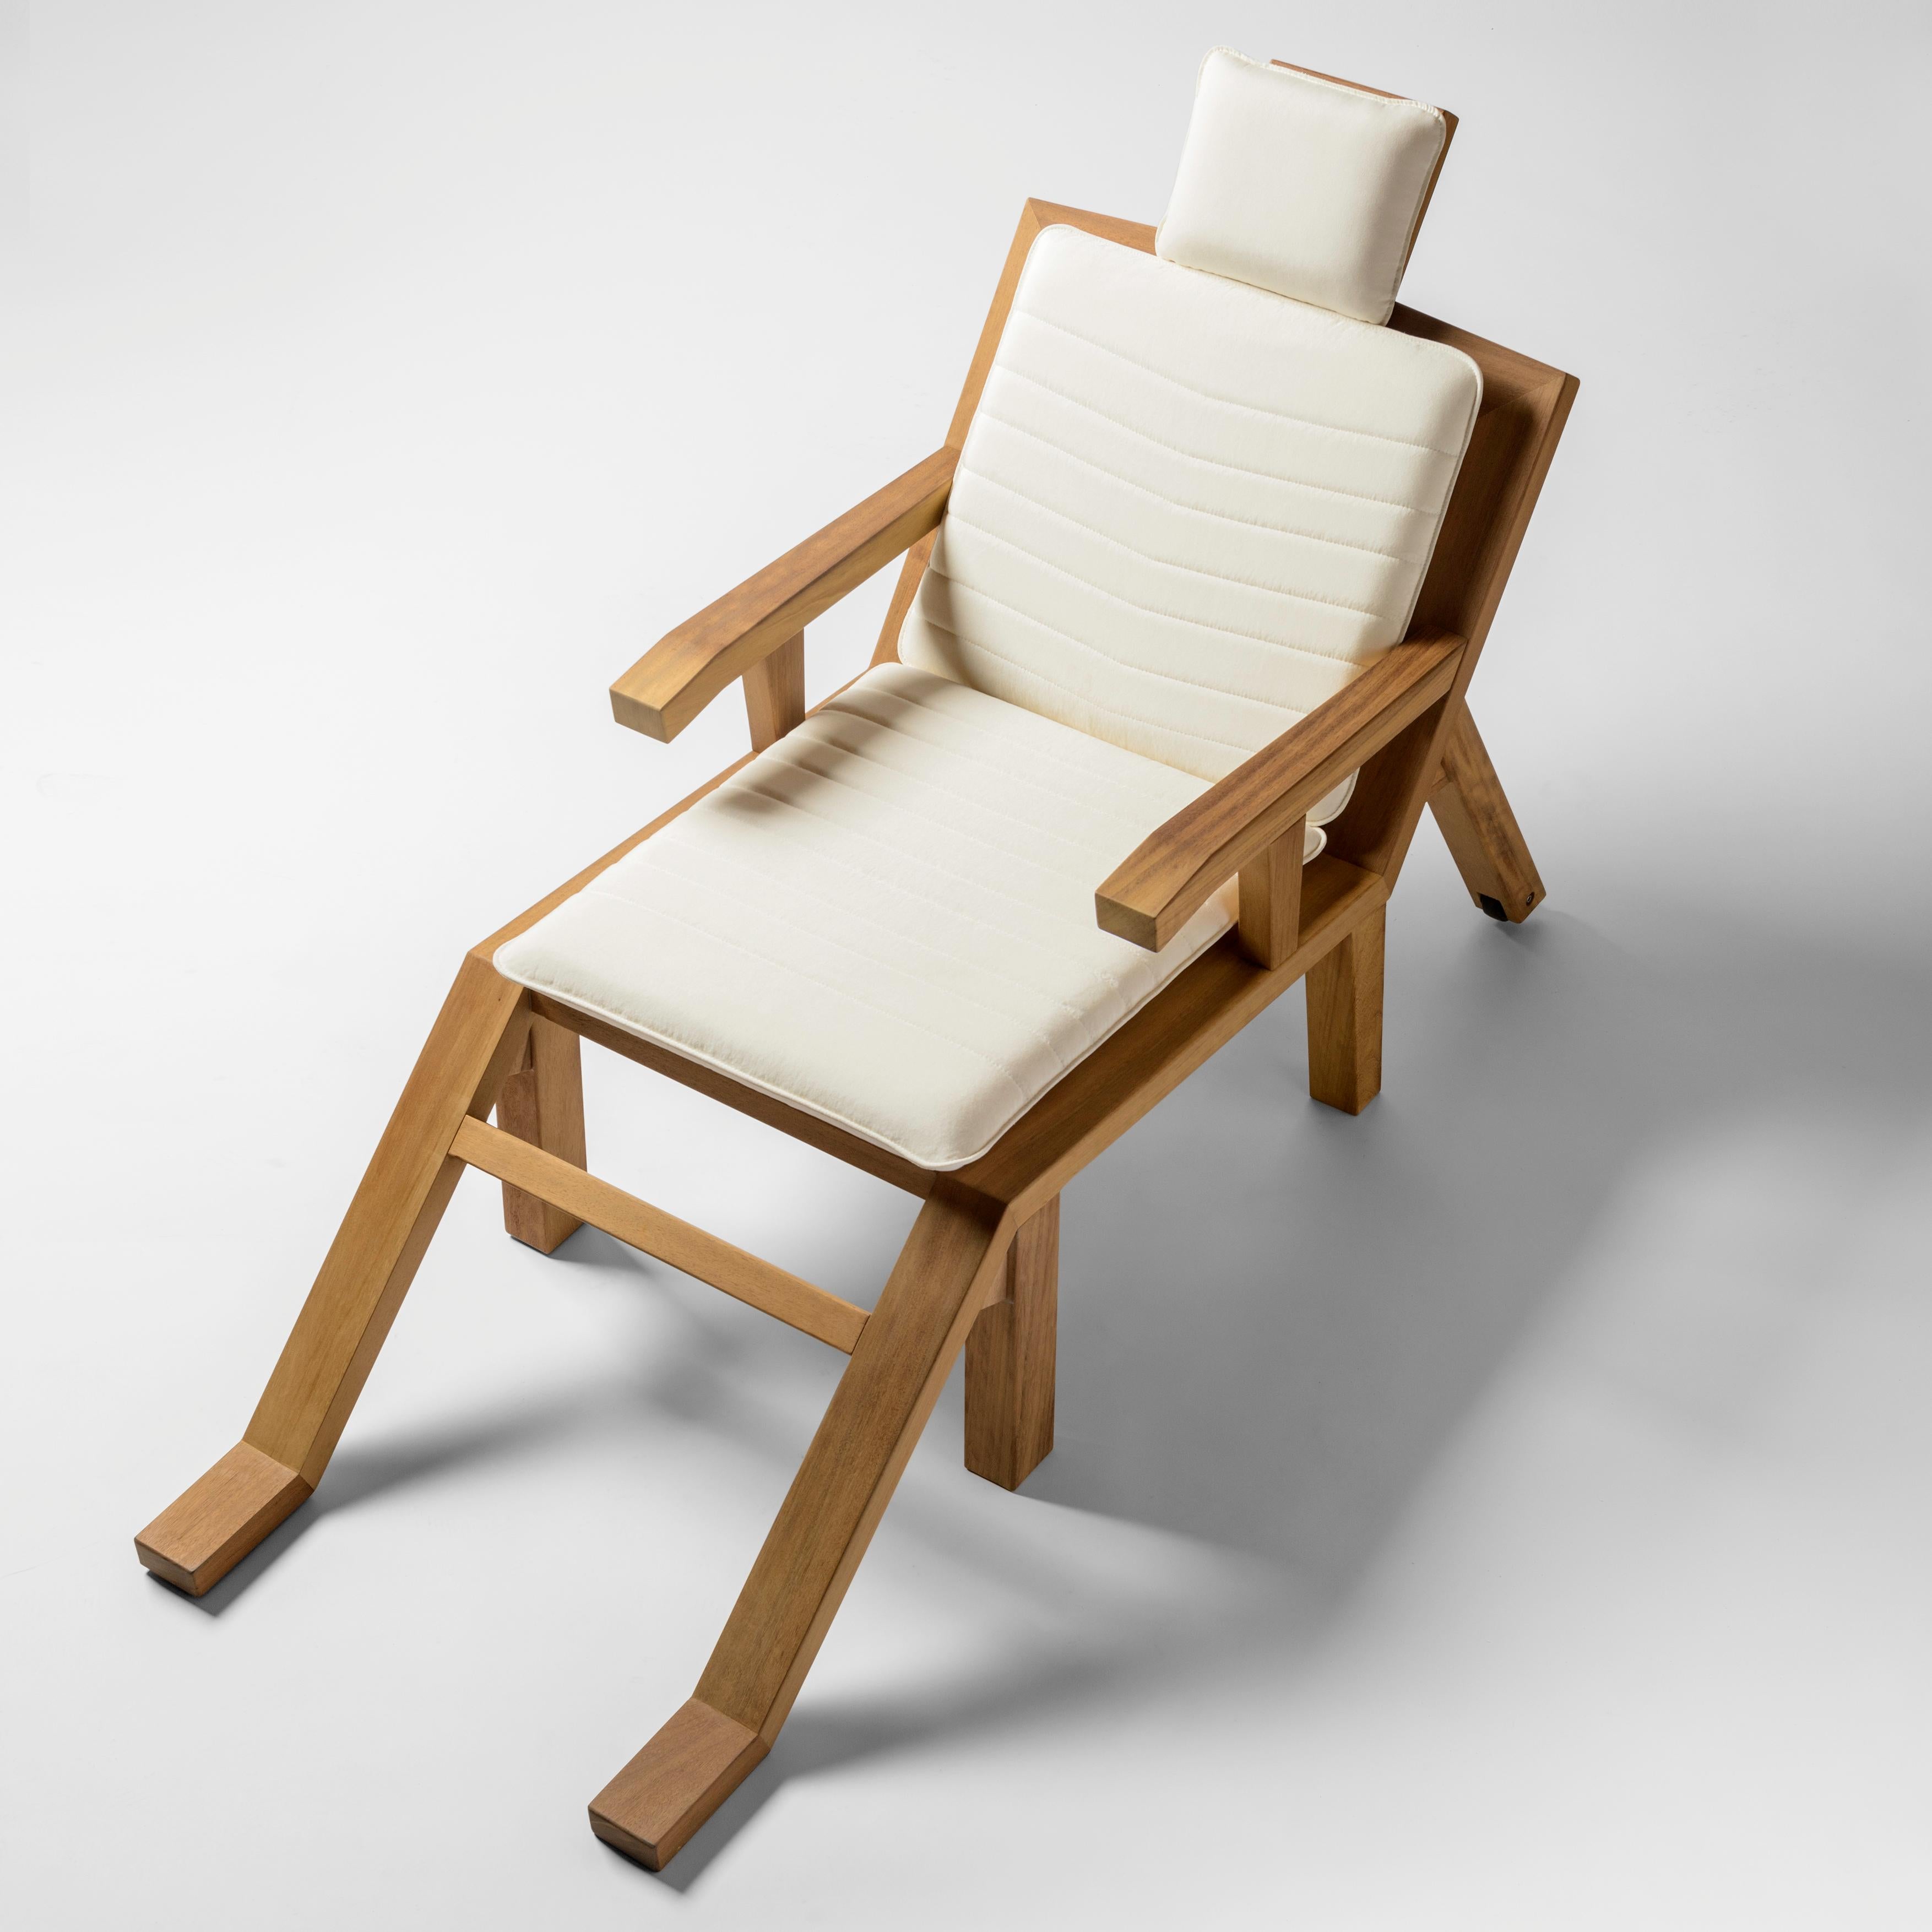 Design by Salvador Dalí­­, 1903 
Manufactured by BD Barcelona

Solid Iroko wooden structure with polyamide wheels. Optional upholstered cushion with water repellent foam and material Apt for outdoor use. The cover is removable.

Measures: 69 x